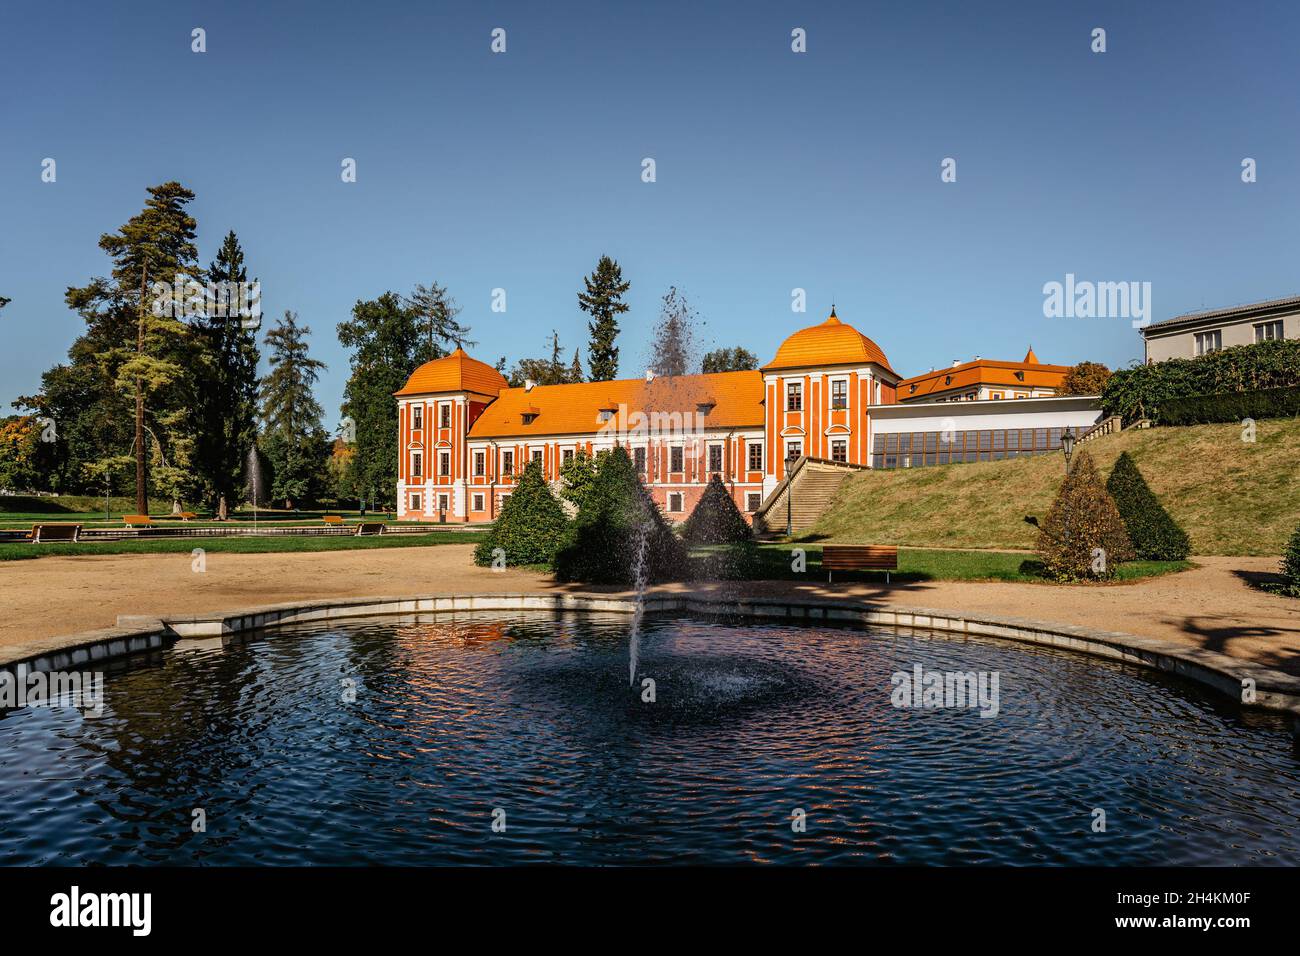 Ostrov,Czech Republic.Chateau built in Baroque style surrounded by beautiful park with fountains,ponds and artificial rocks.Sightseeing tour close to Stock Photo